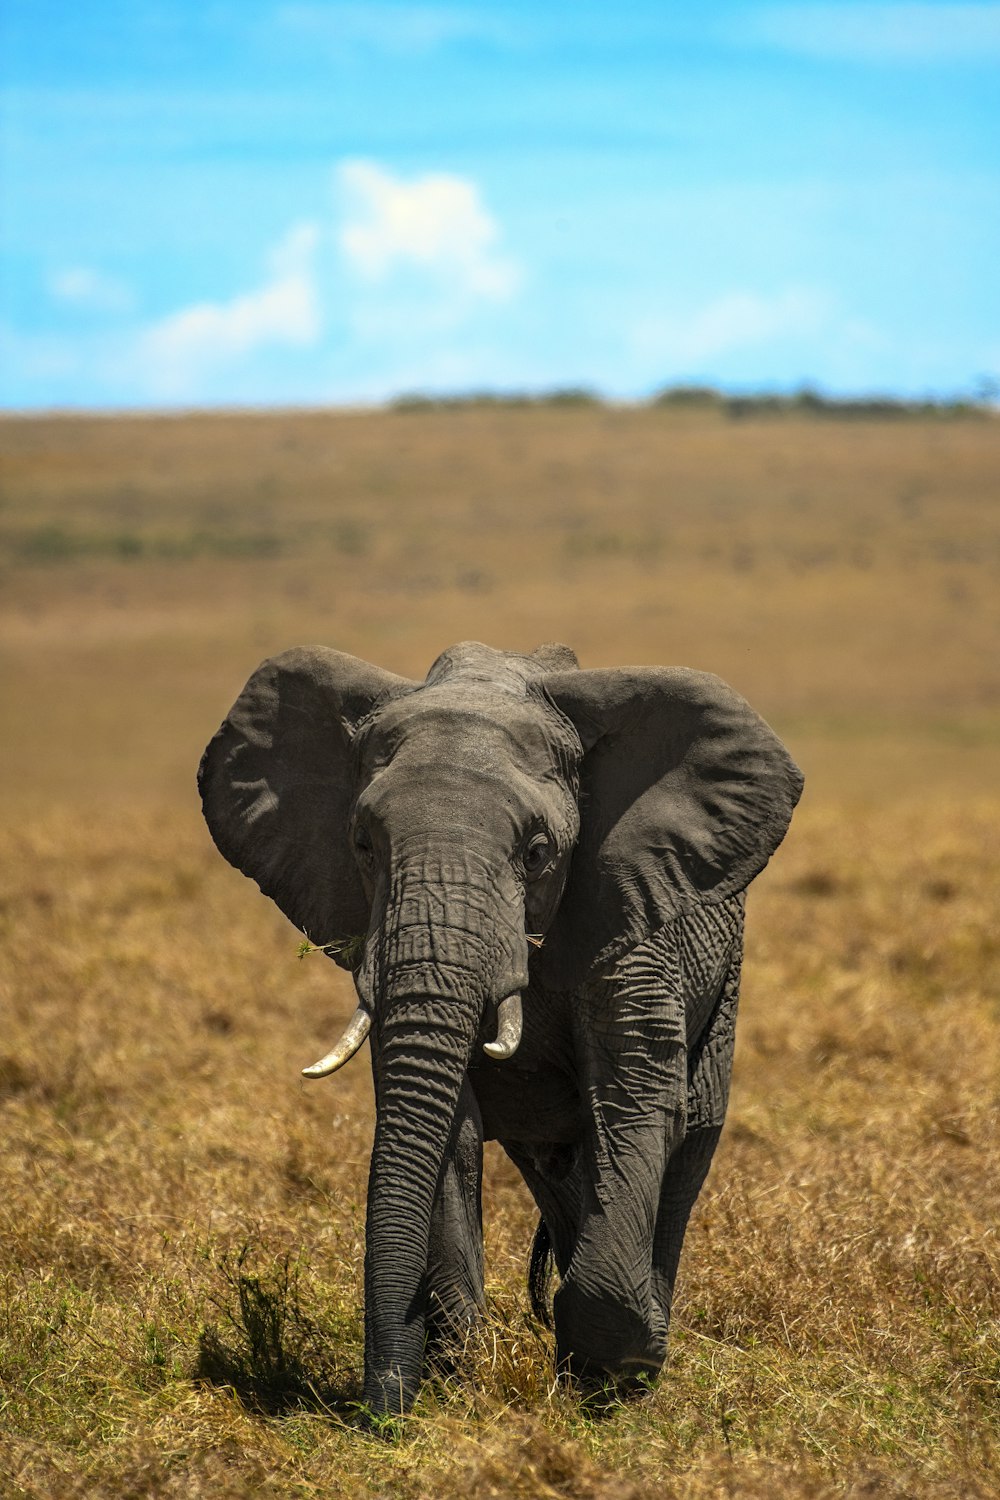 black elephant on brown grass field during daytime